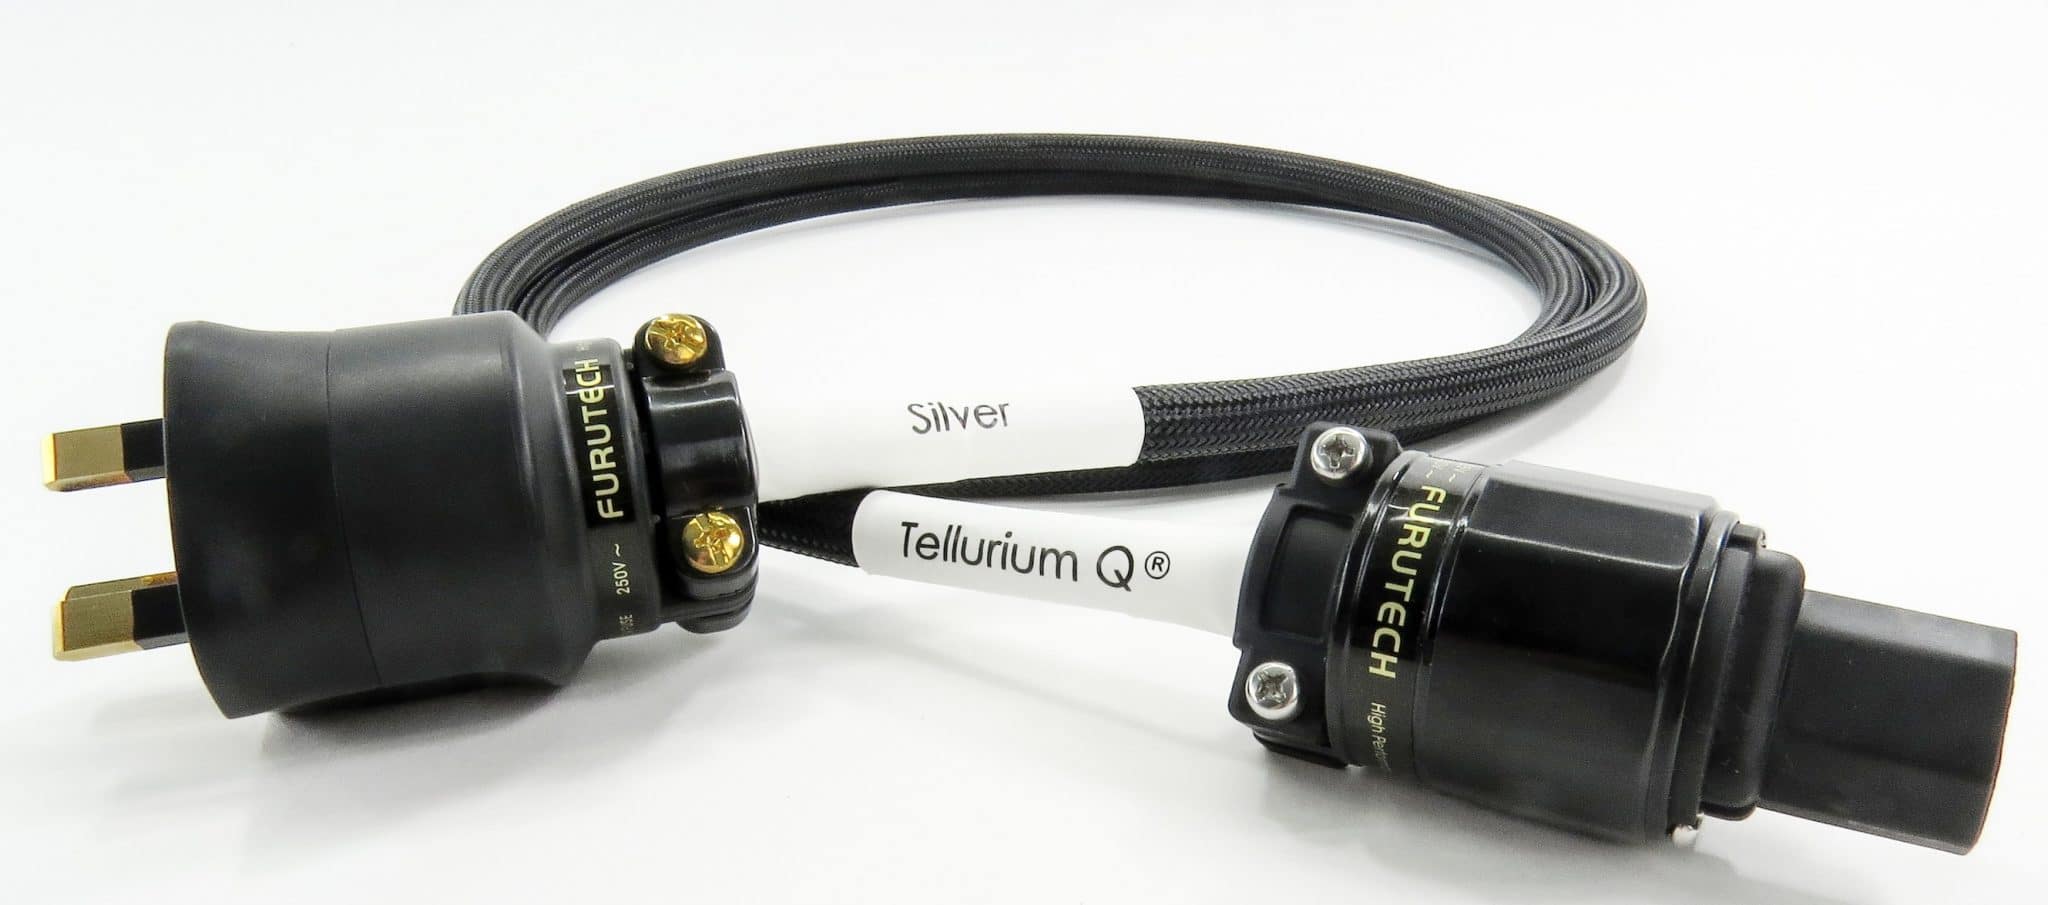 Silver Mains Cabling From Tellurium Q 